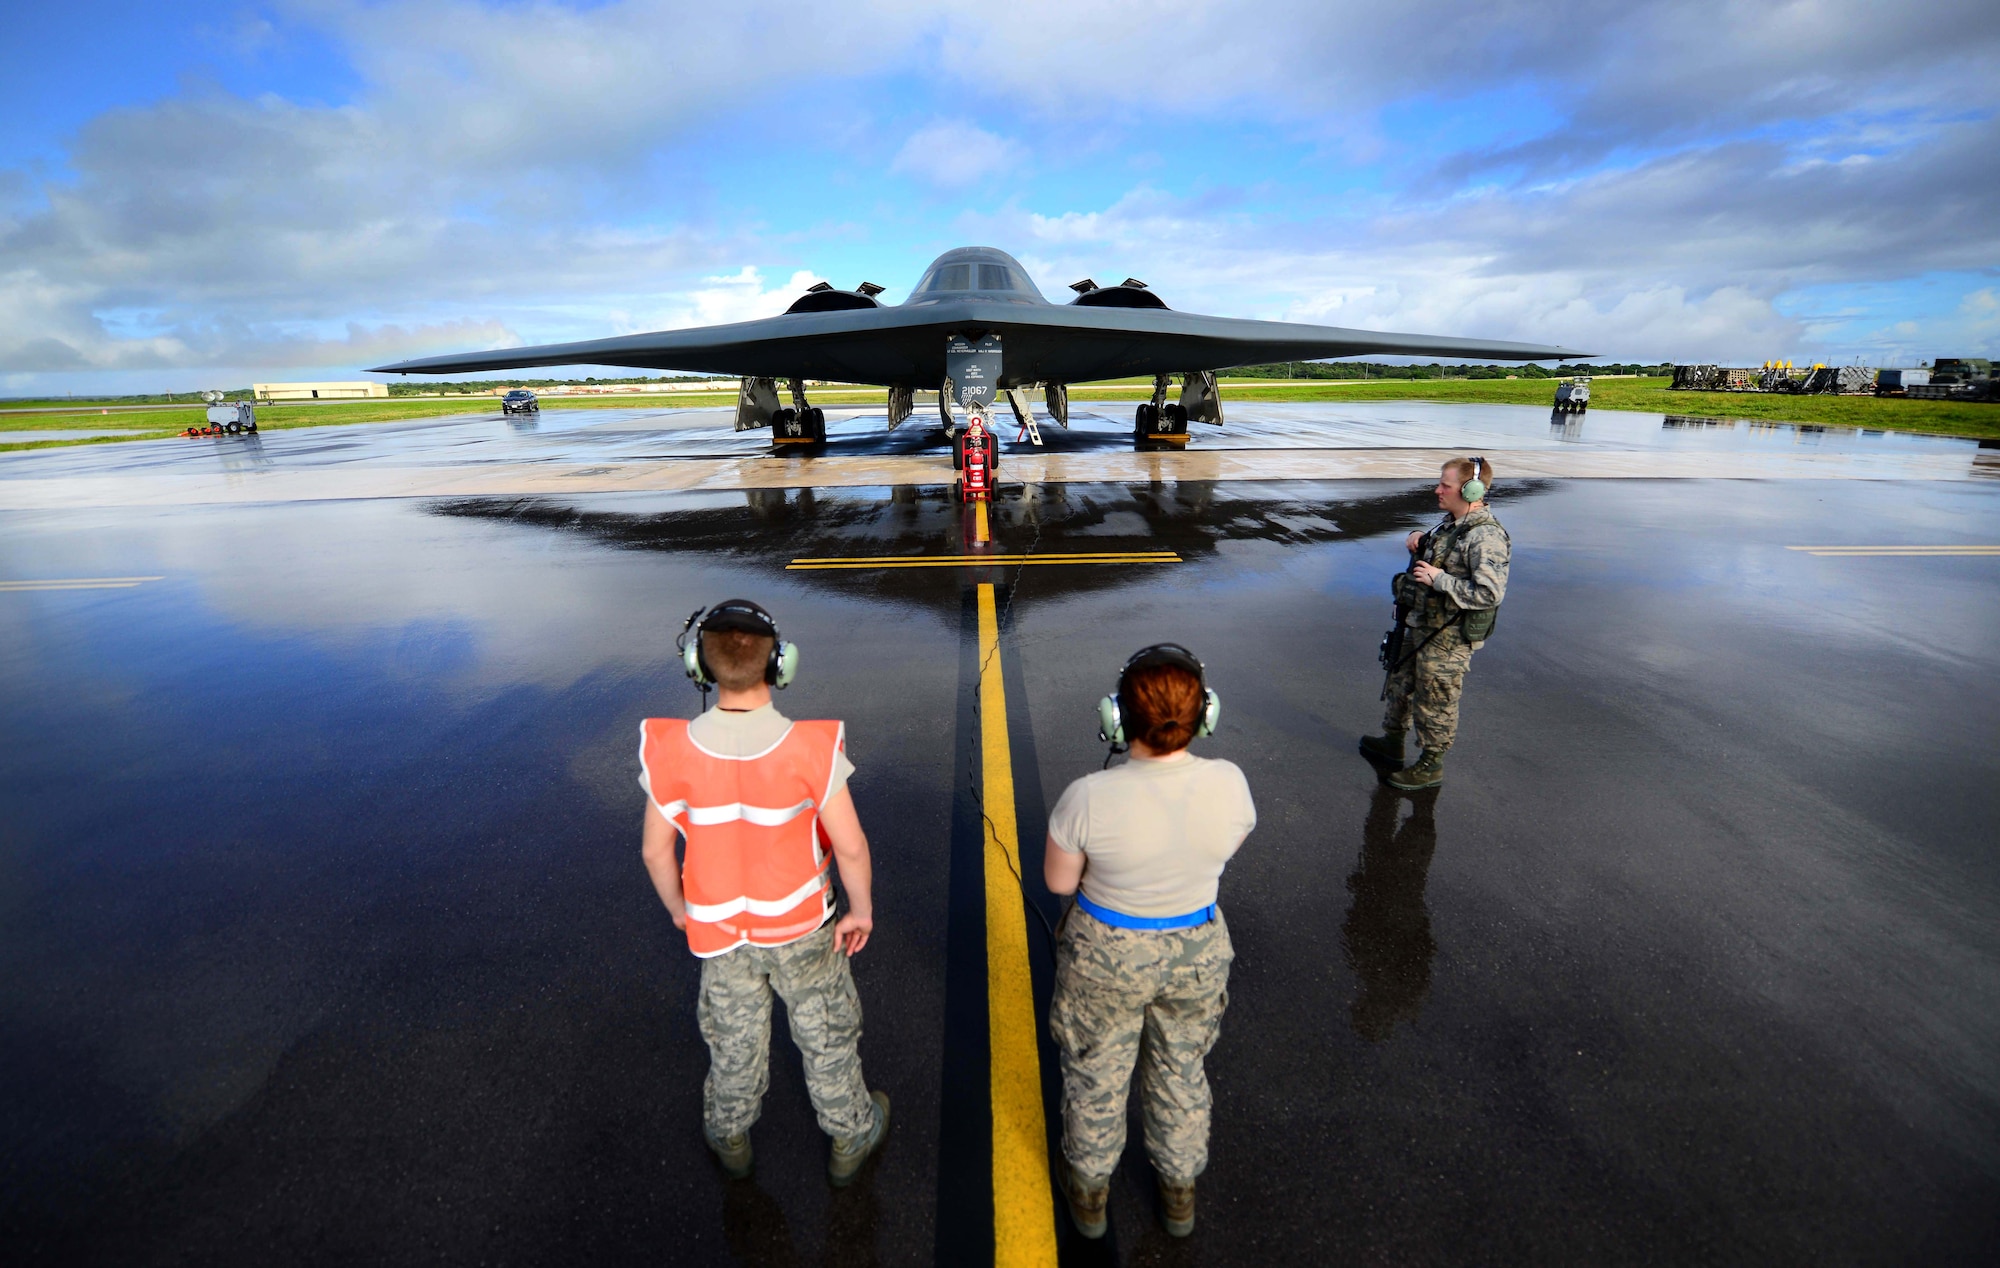 U.S. Air Force maintenance technicians assigned to the 509th Aircraft Maintenance Squadron, Whiteman Air Force Base, Mo., communicate with a B-2 Spirit pilot during pre-flight checks prior to a local training mission at Anderson Air Force Base, Guam Jan. 12, 2017. Close to 200 Airmen from Whiteman Air Force Base, Mo., and Barksdale Air Force Base, La., deployed to Andersen AFB, in support of U.S. Strategic Command Bomber and Deterrence missions. USSTRATCOM bomber missions familiarize aircrew with airbases and operations in different Geographic Combatant Commands. (U.S. Air Force photo by Tech Sgt. Andy M. Kin)